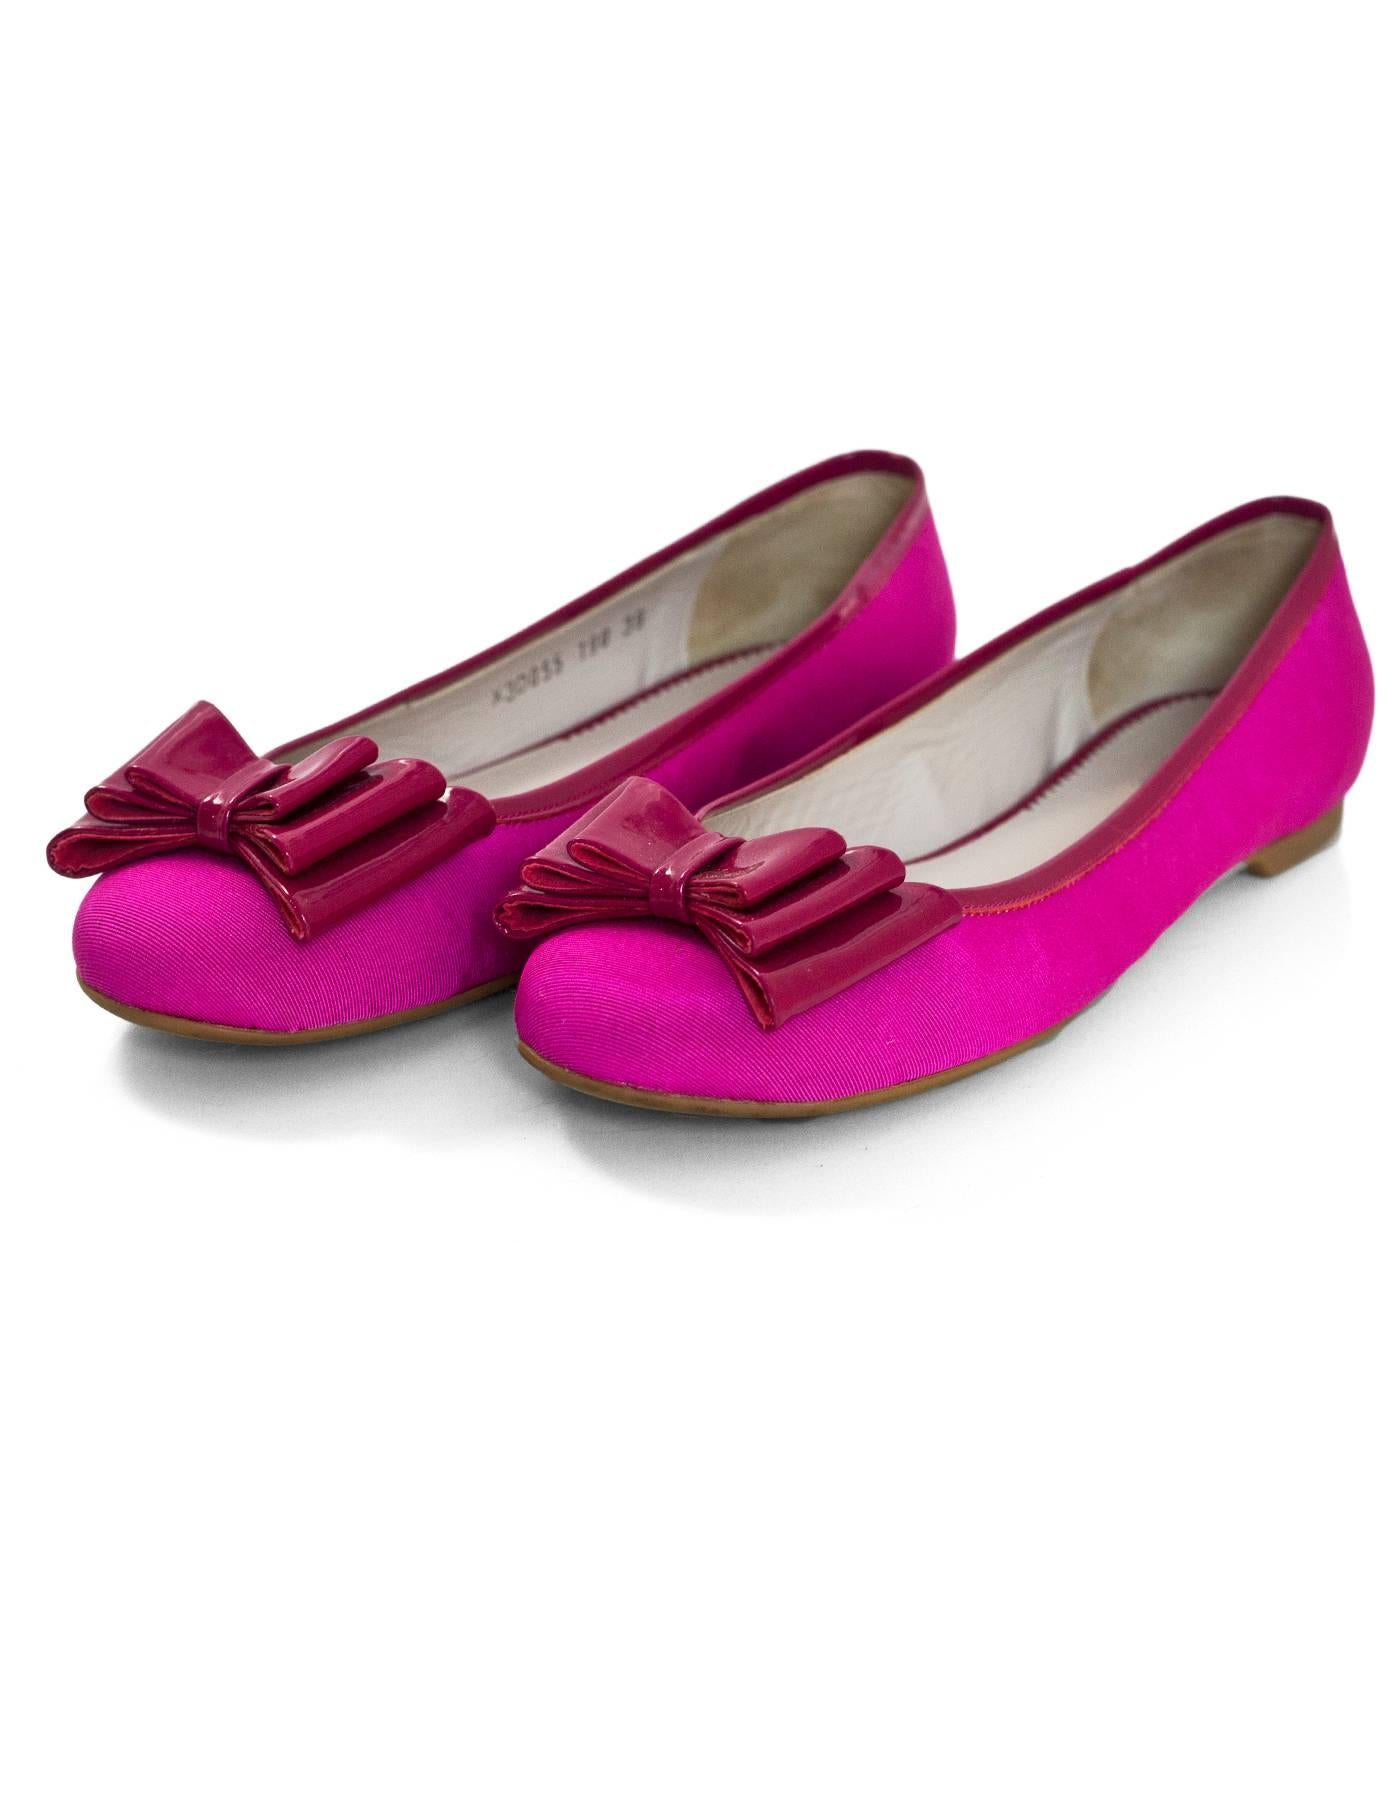 Emporio Armani Pink Ballet Flats with Bow Sz 39

Color: Pink
Materials: grossgrain, patent leather
Closure/Opening: Slide on
Sole Stamp: Emporio Armani
Retail Price: $295 + tax
Overall Condition: Excellent pre-owned condition with the exception of